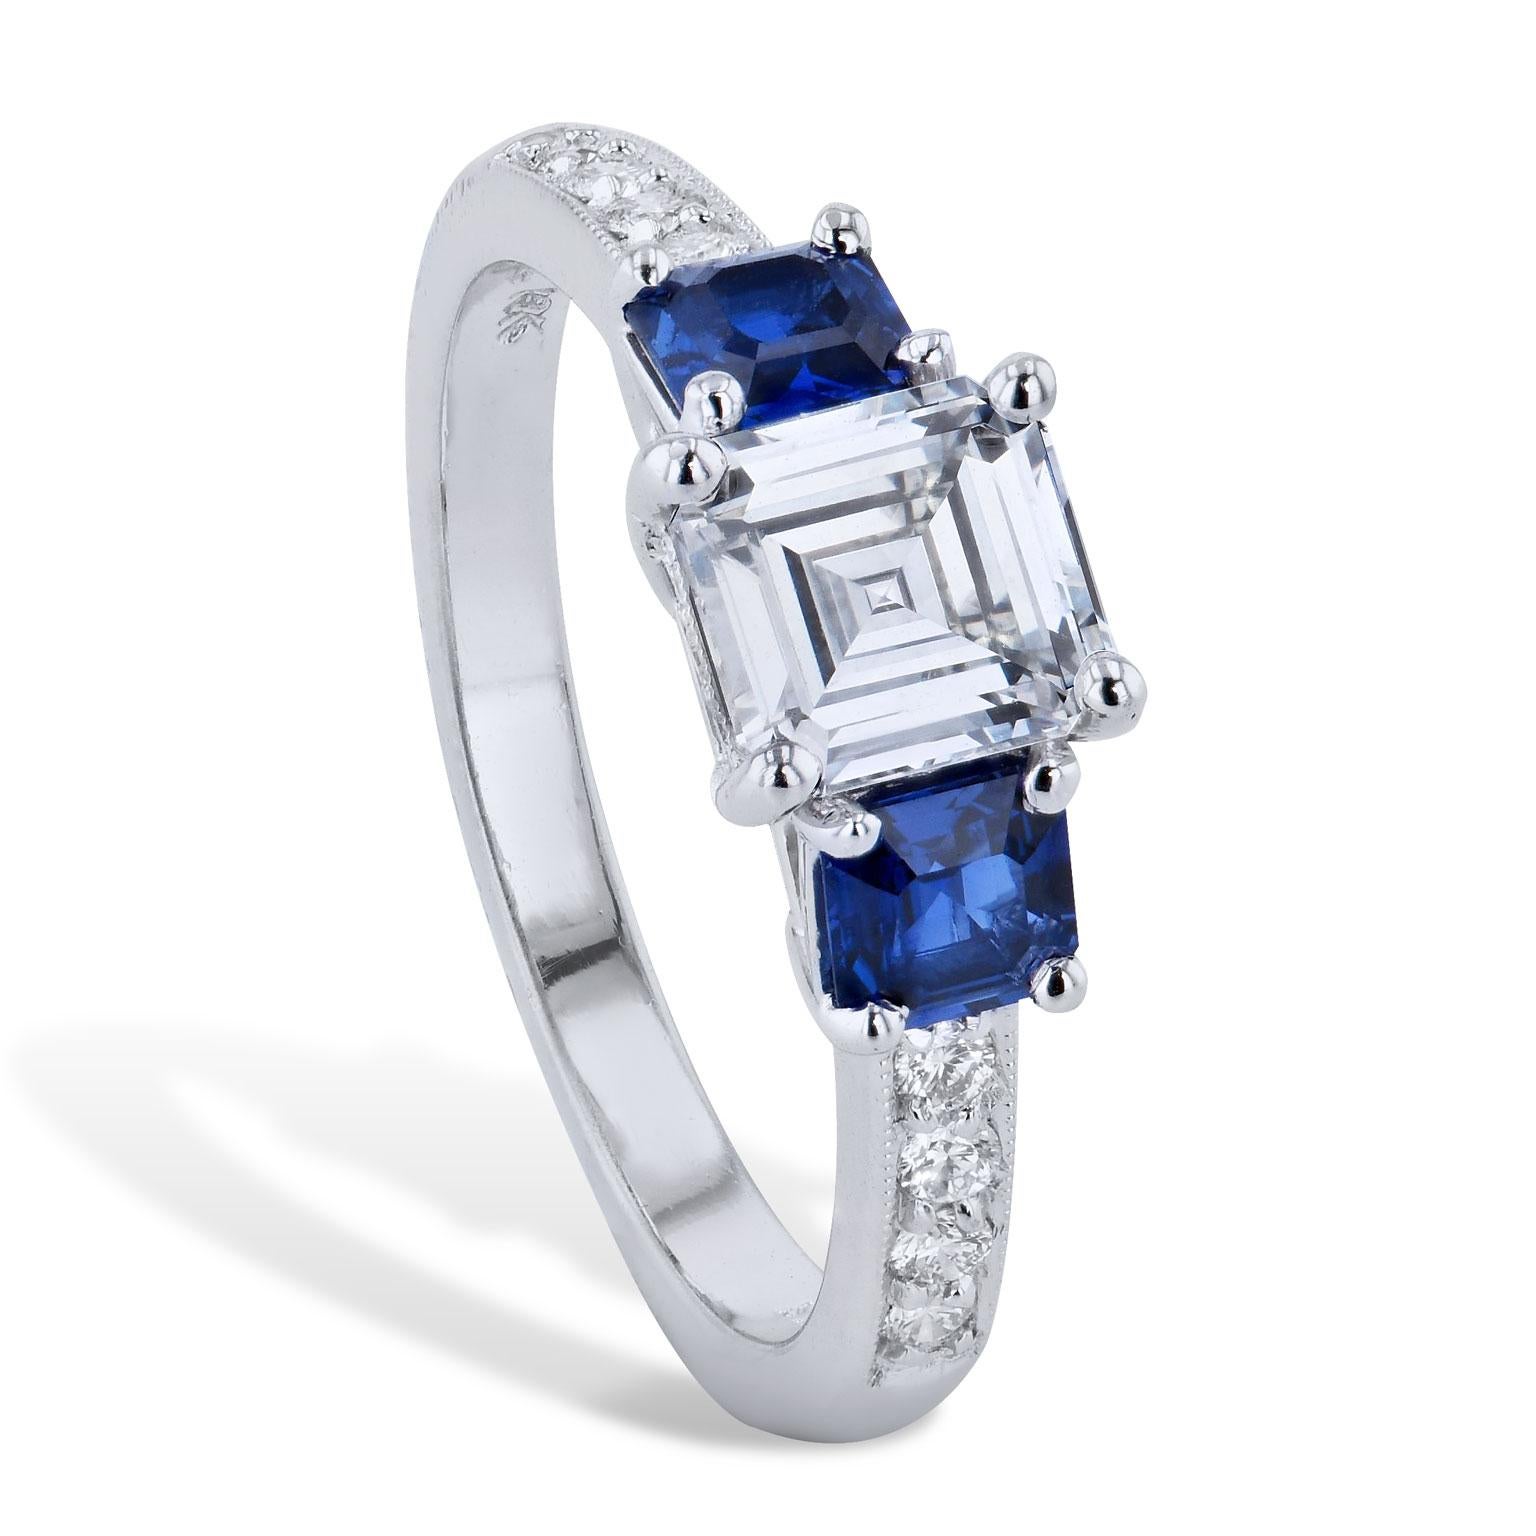 H&H GIA Cert 1.02 carat Square Emerald Cut Diamond Ring 2 Assher Blue Sapphires

A Platinum engagement ring with 1.02 ct square Emerald cut diamond, G-VS2 (GIA cert# 12243899) prong-set in the center and 2 Assher blue sapphires set on either side